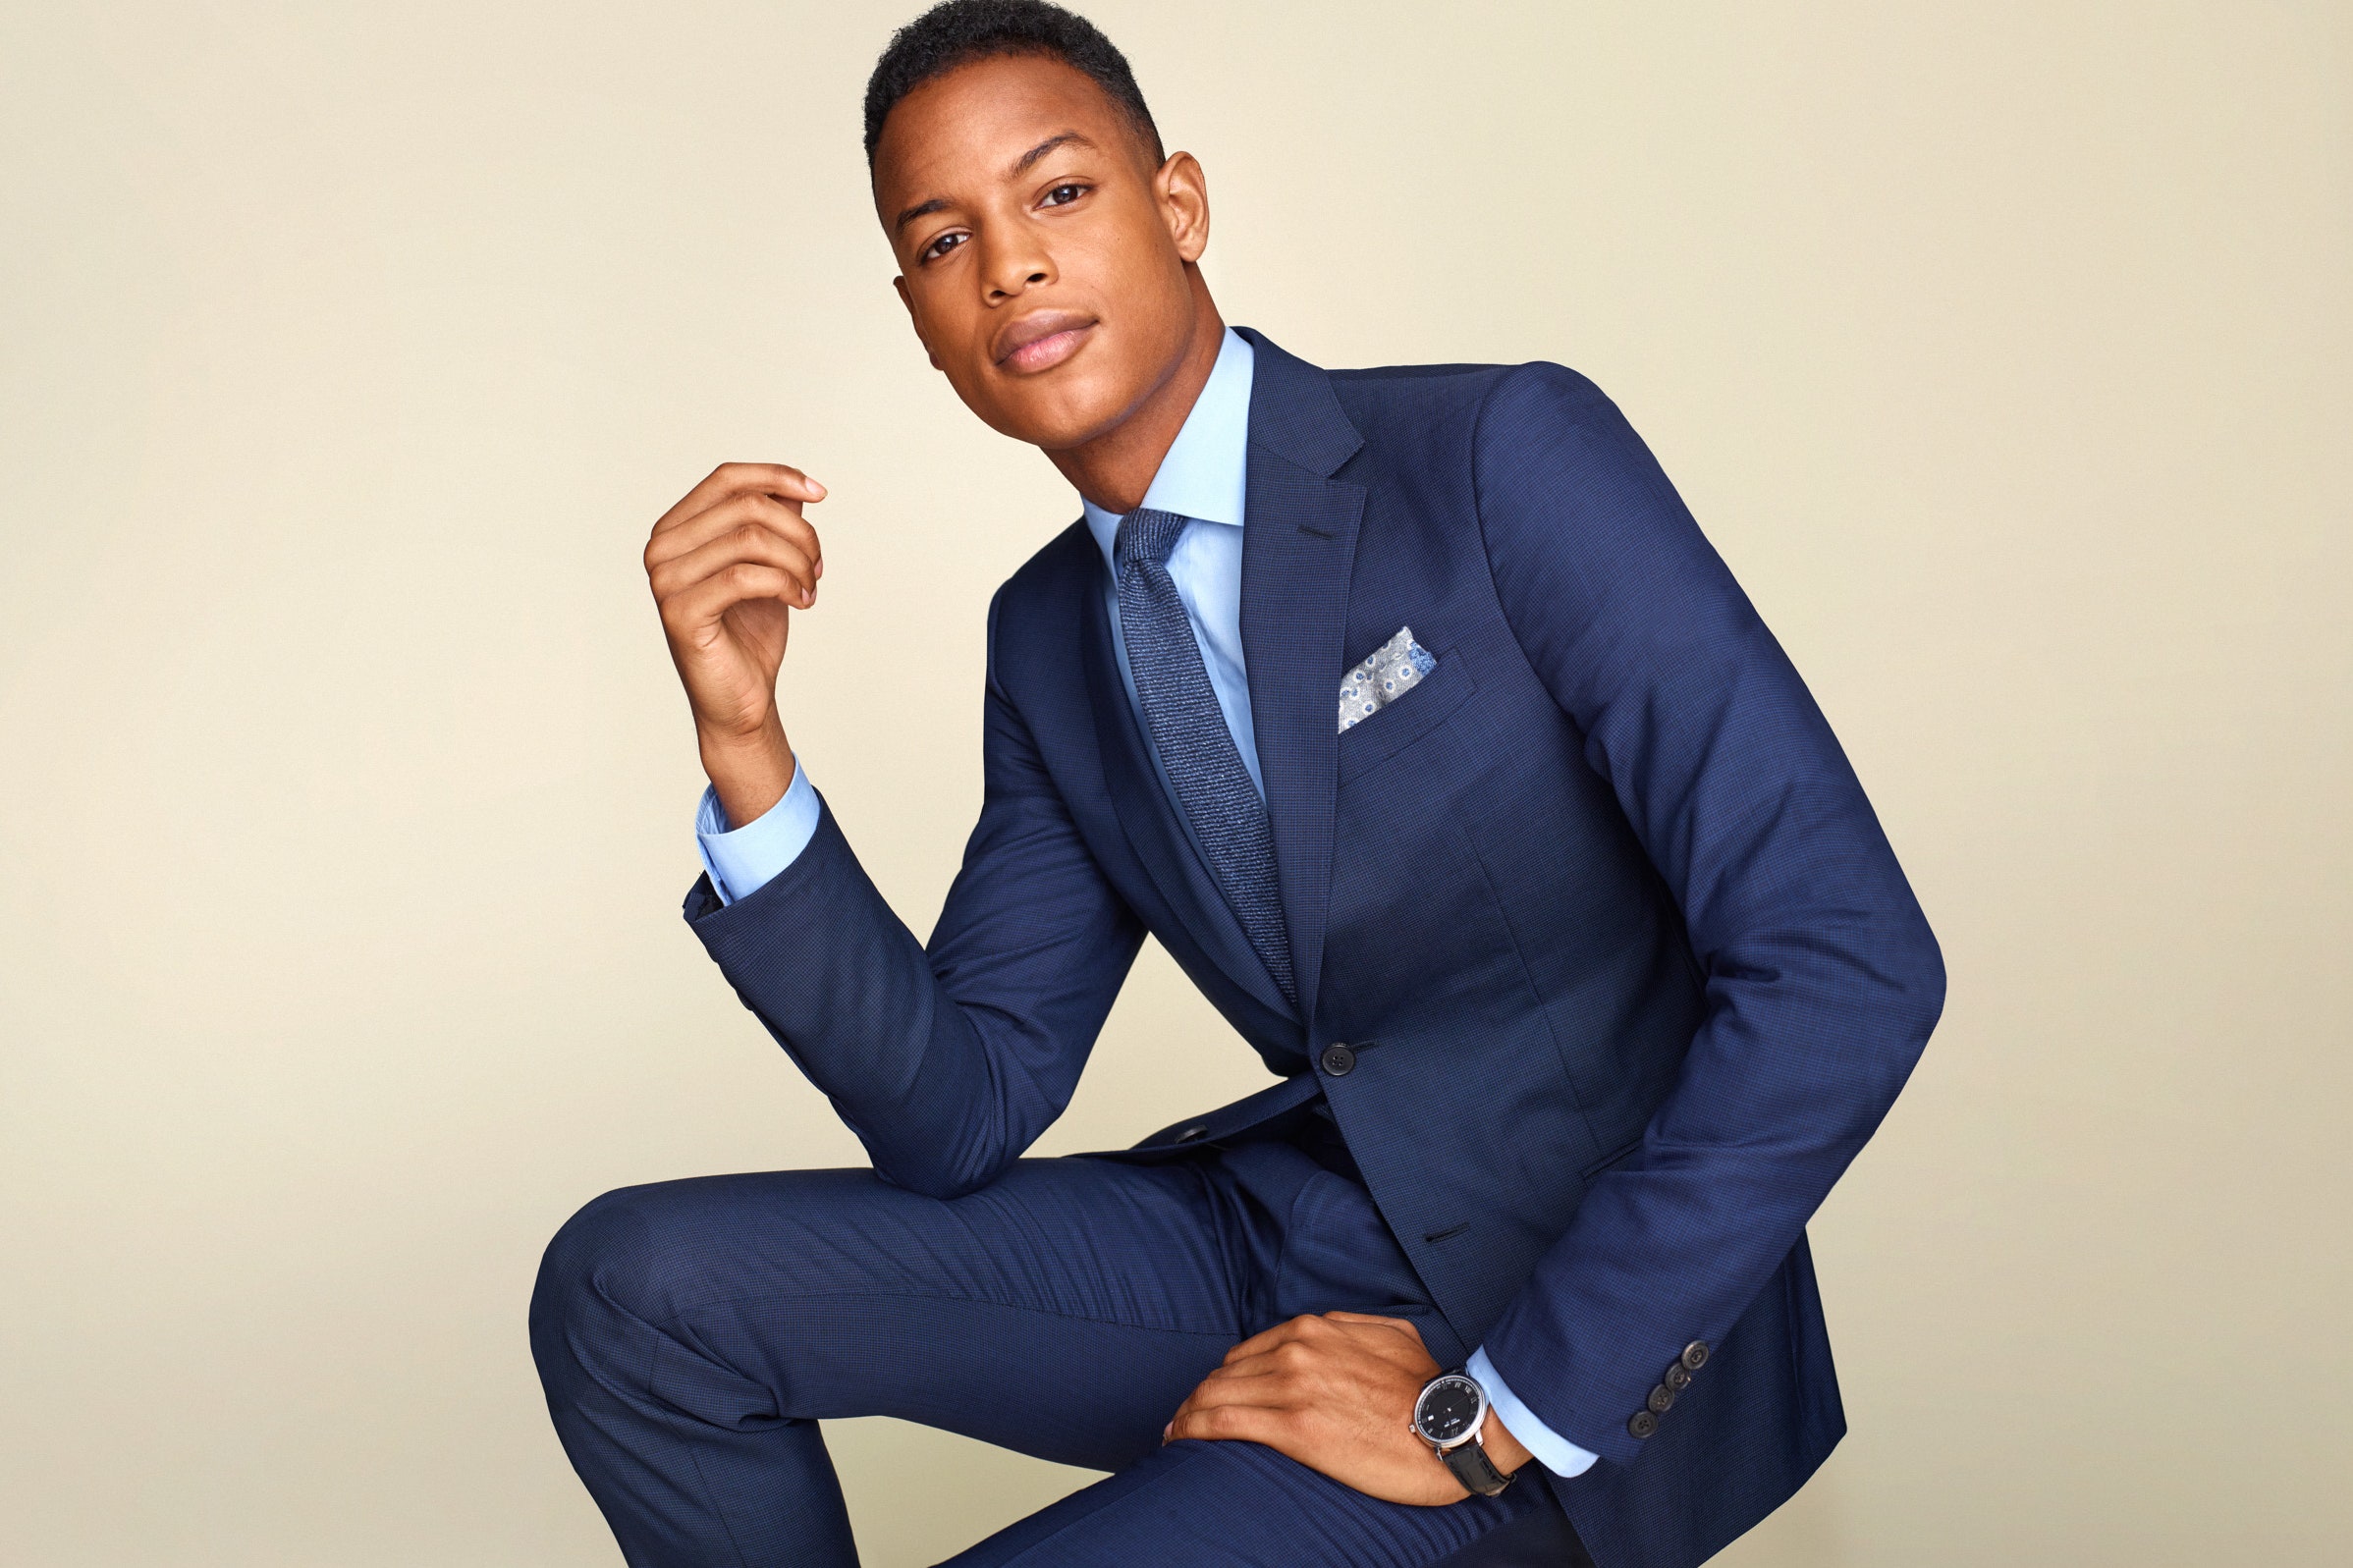 Men’s Clothes Online | What Should You Know When Buying a Bespoke Suit?